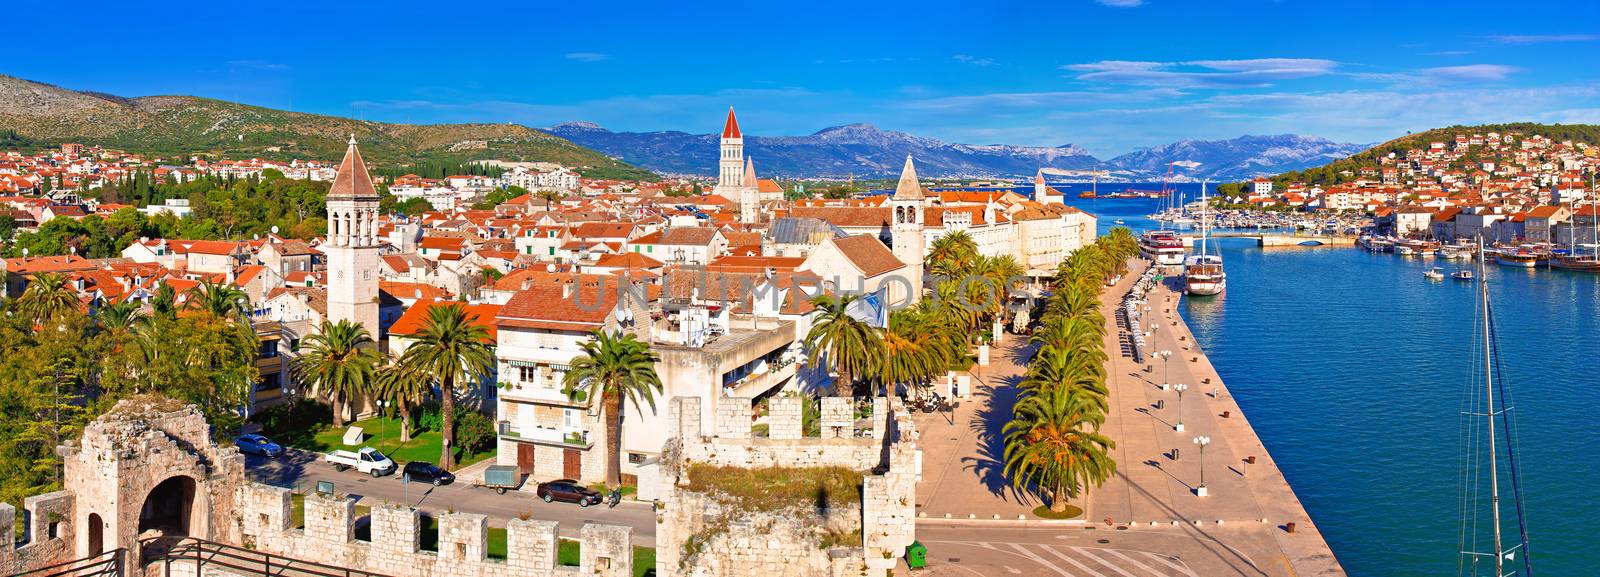 Town of Trogir waterfront and landmarks panoramic view by xbrchx